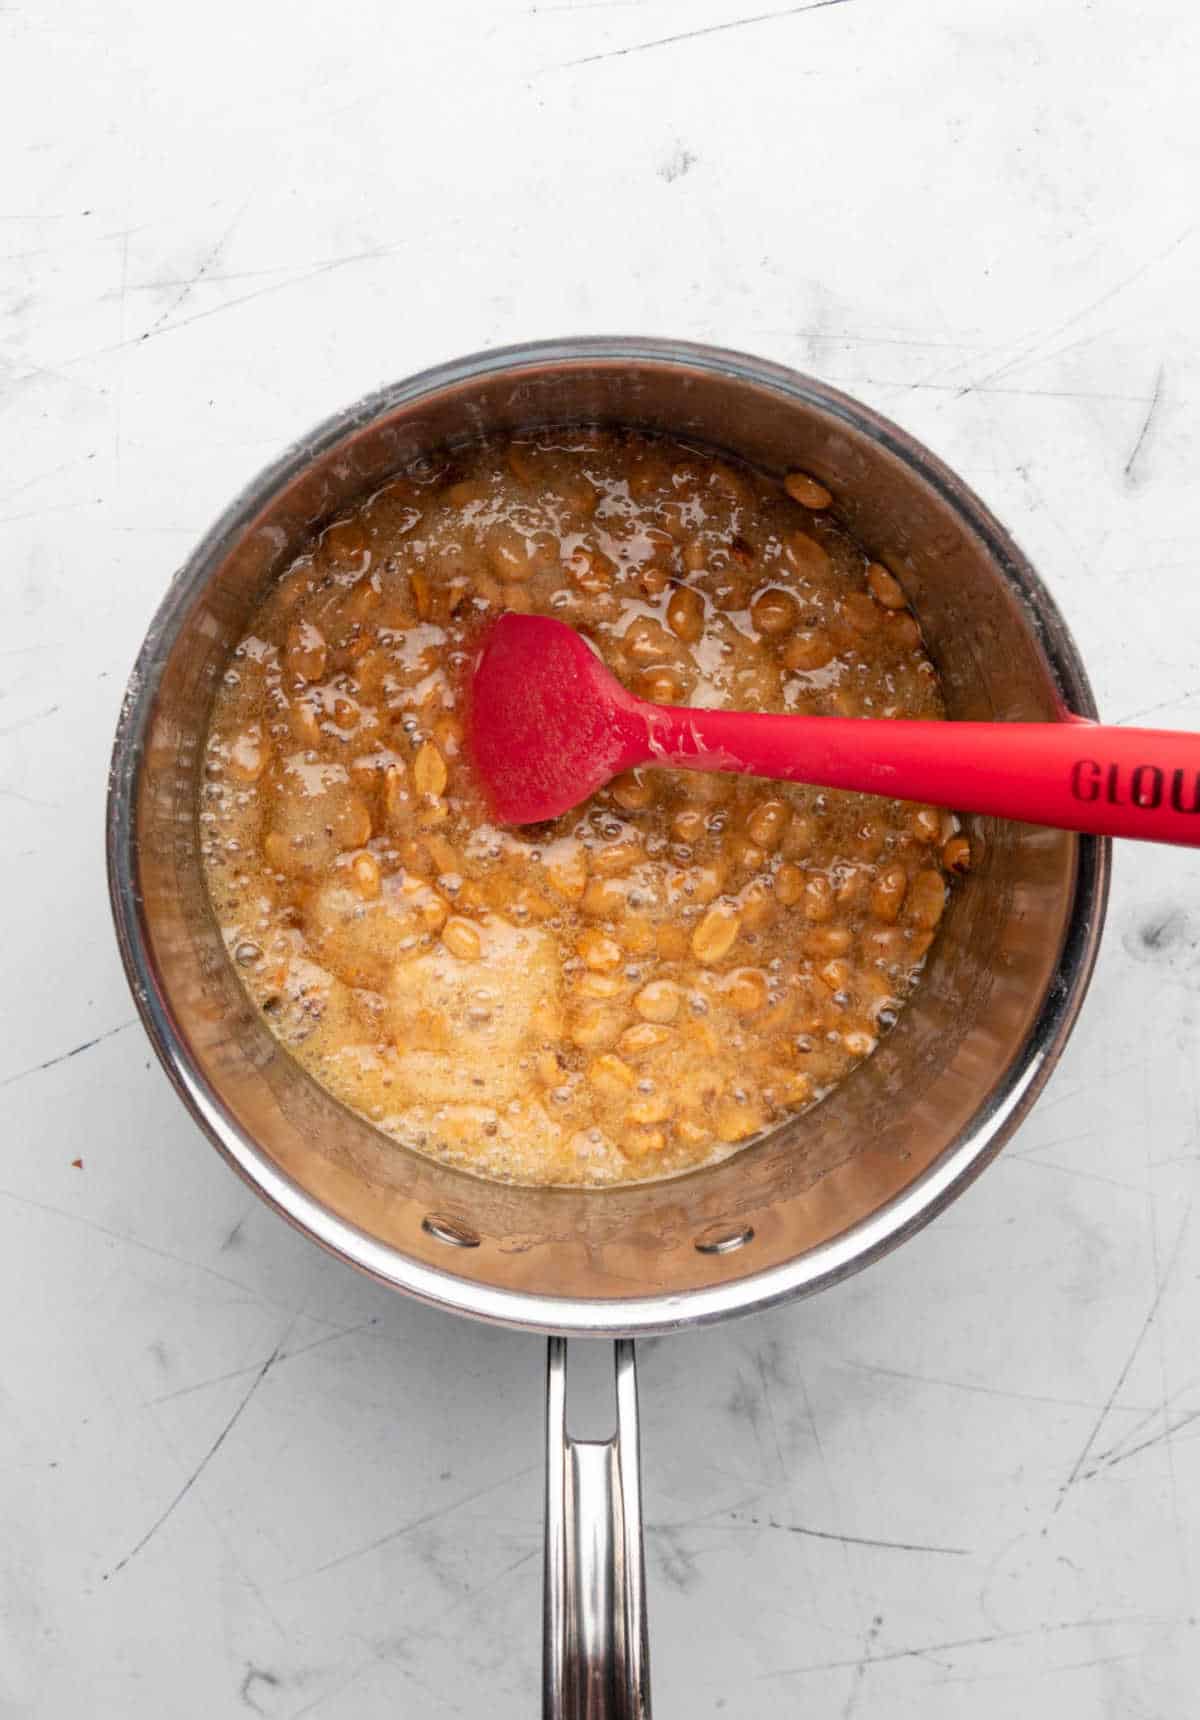 Amber colored peanut brittle mixture cooking in a saucepan. 